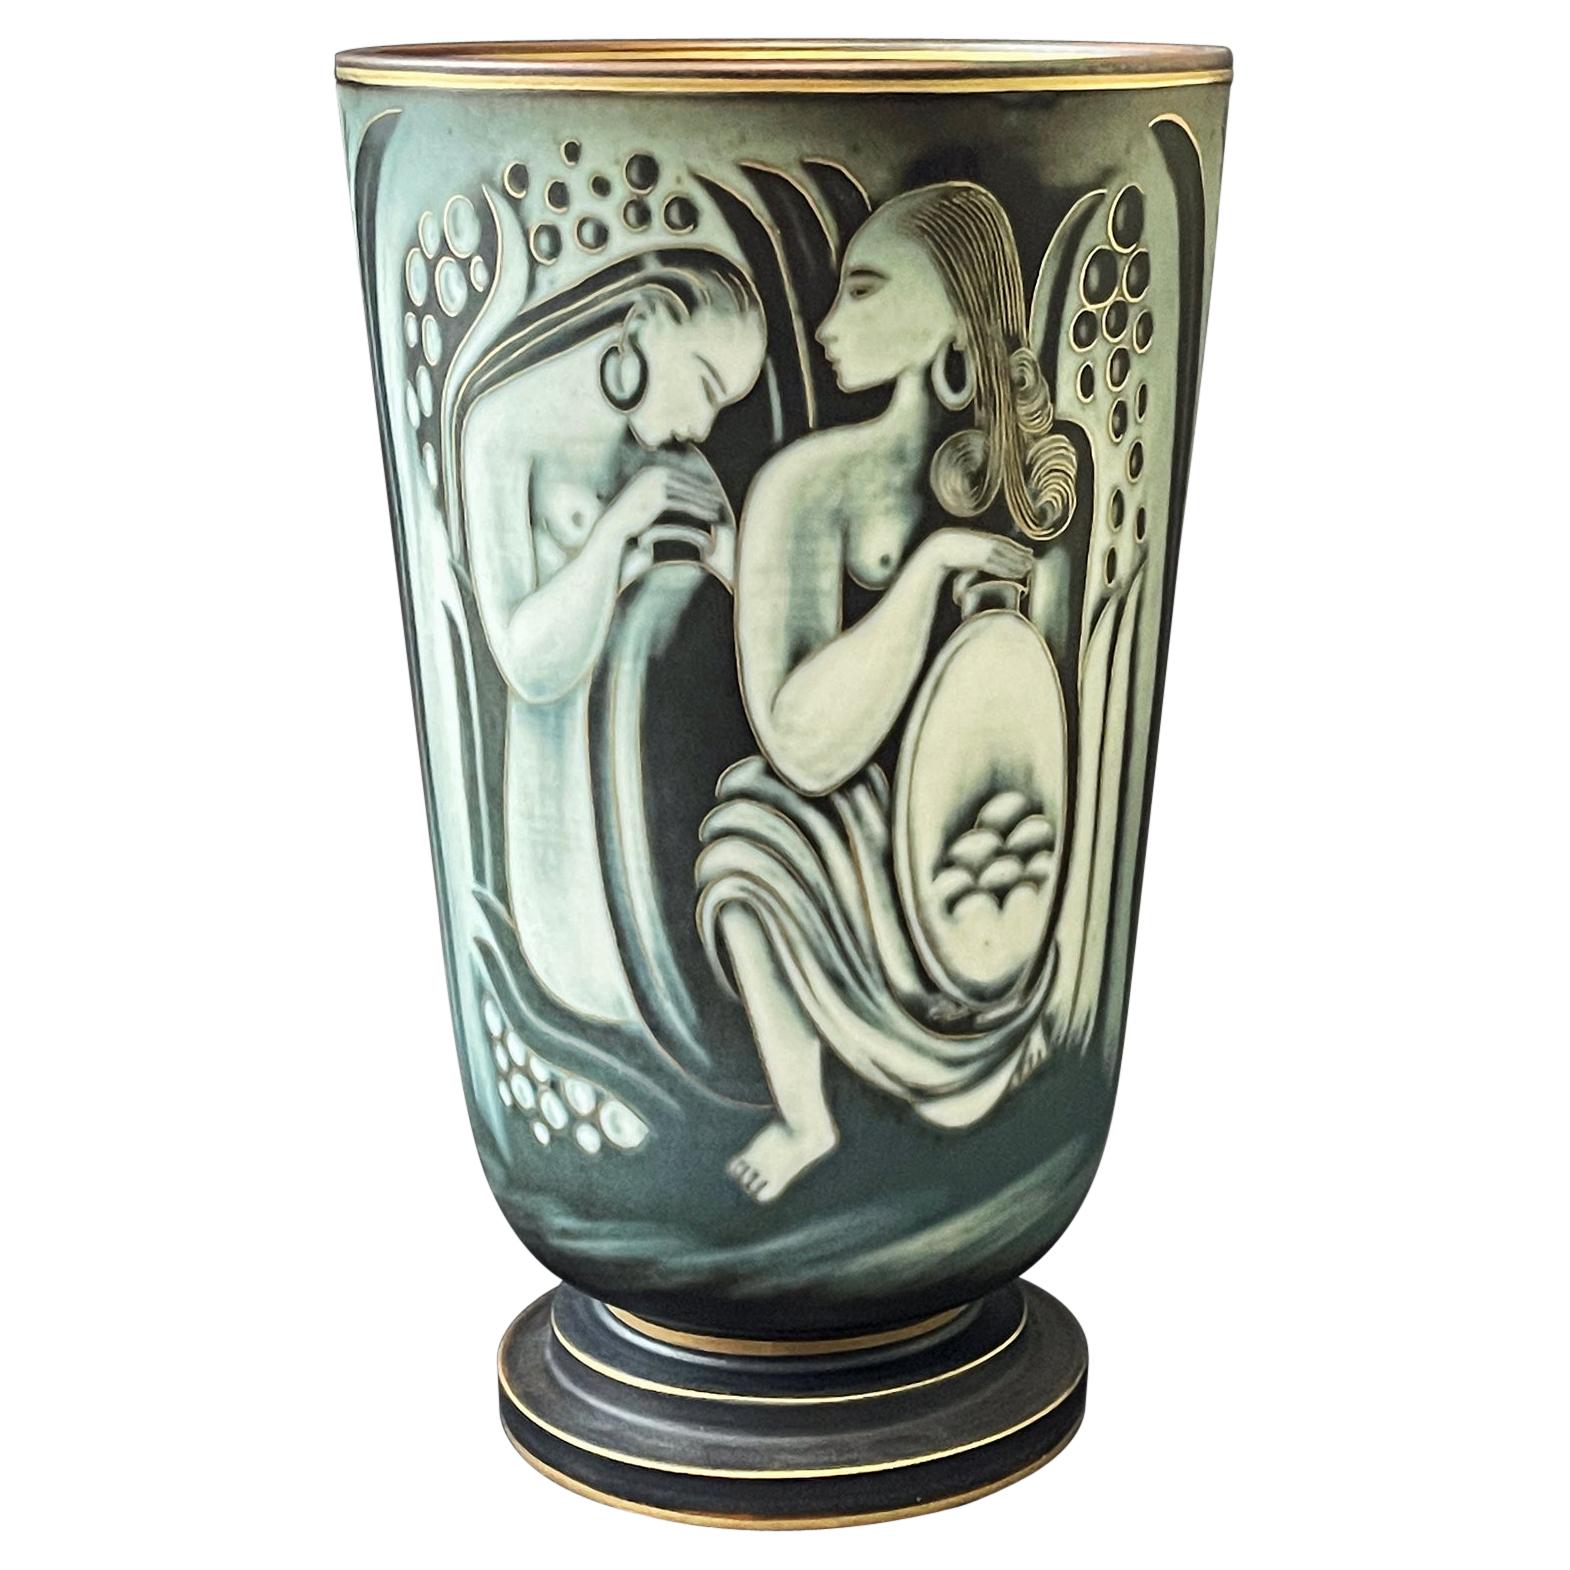 "Gathering Water, " Fabulous Art Deco Vase with Female Nudes by Nylund/Rorstrand For Sale